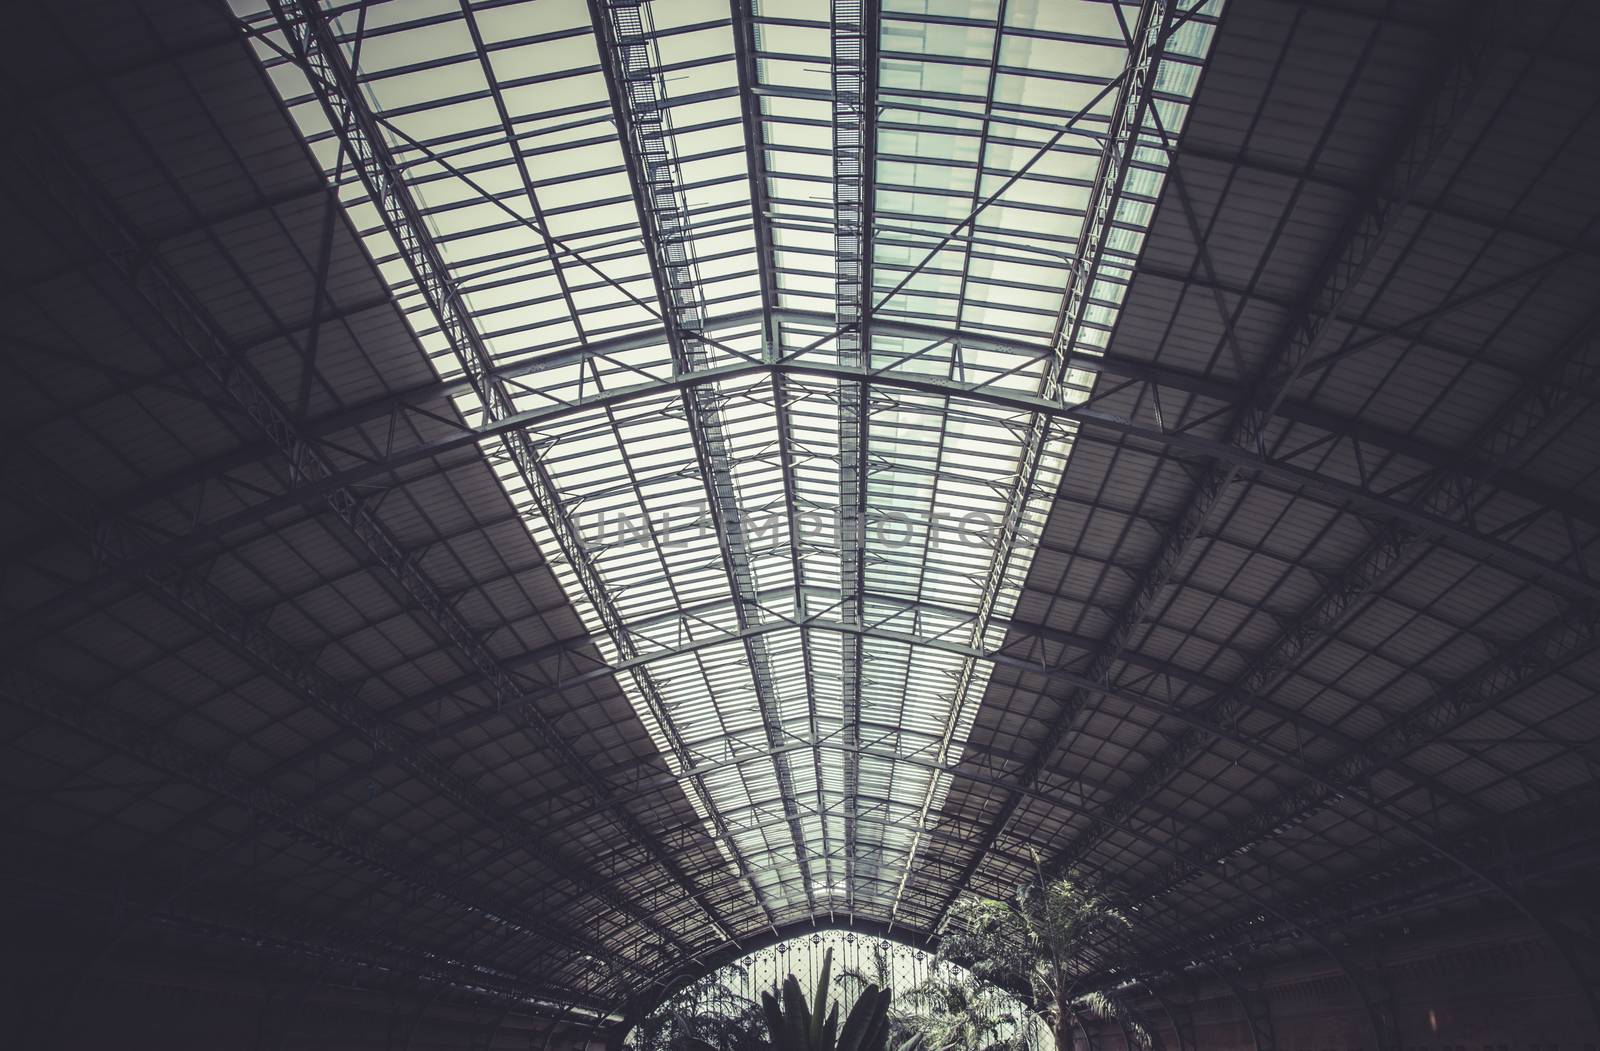 Atocha train station, Image of the city of Madrid, its character by FernandoCortes